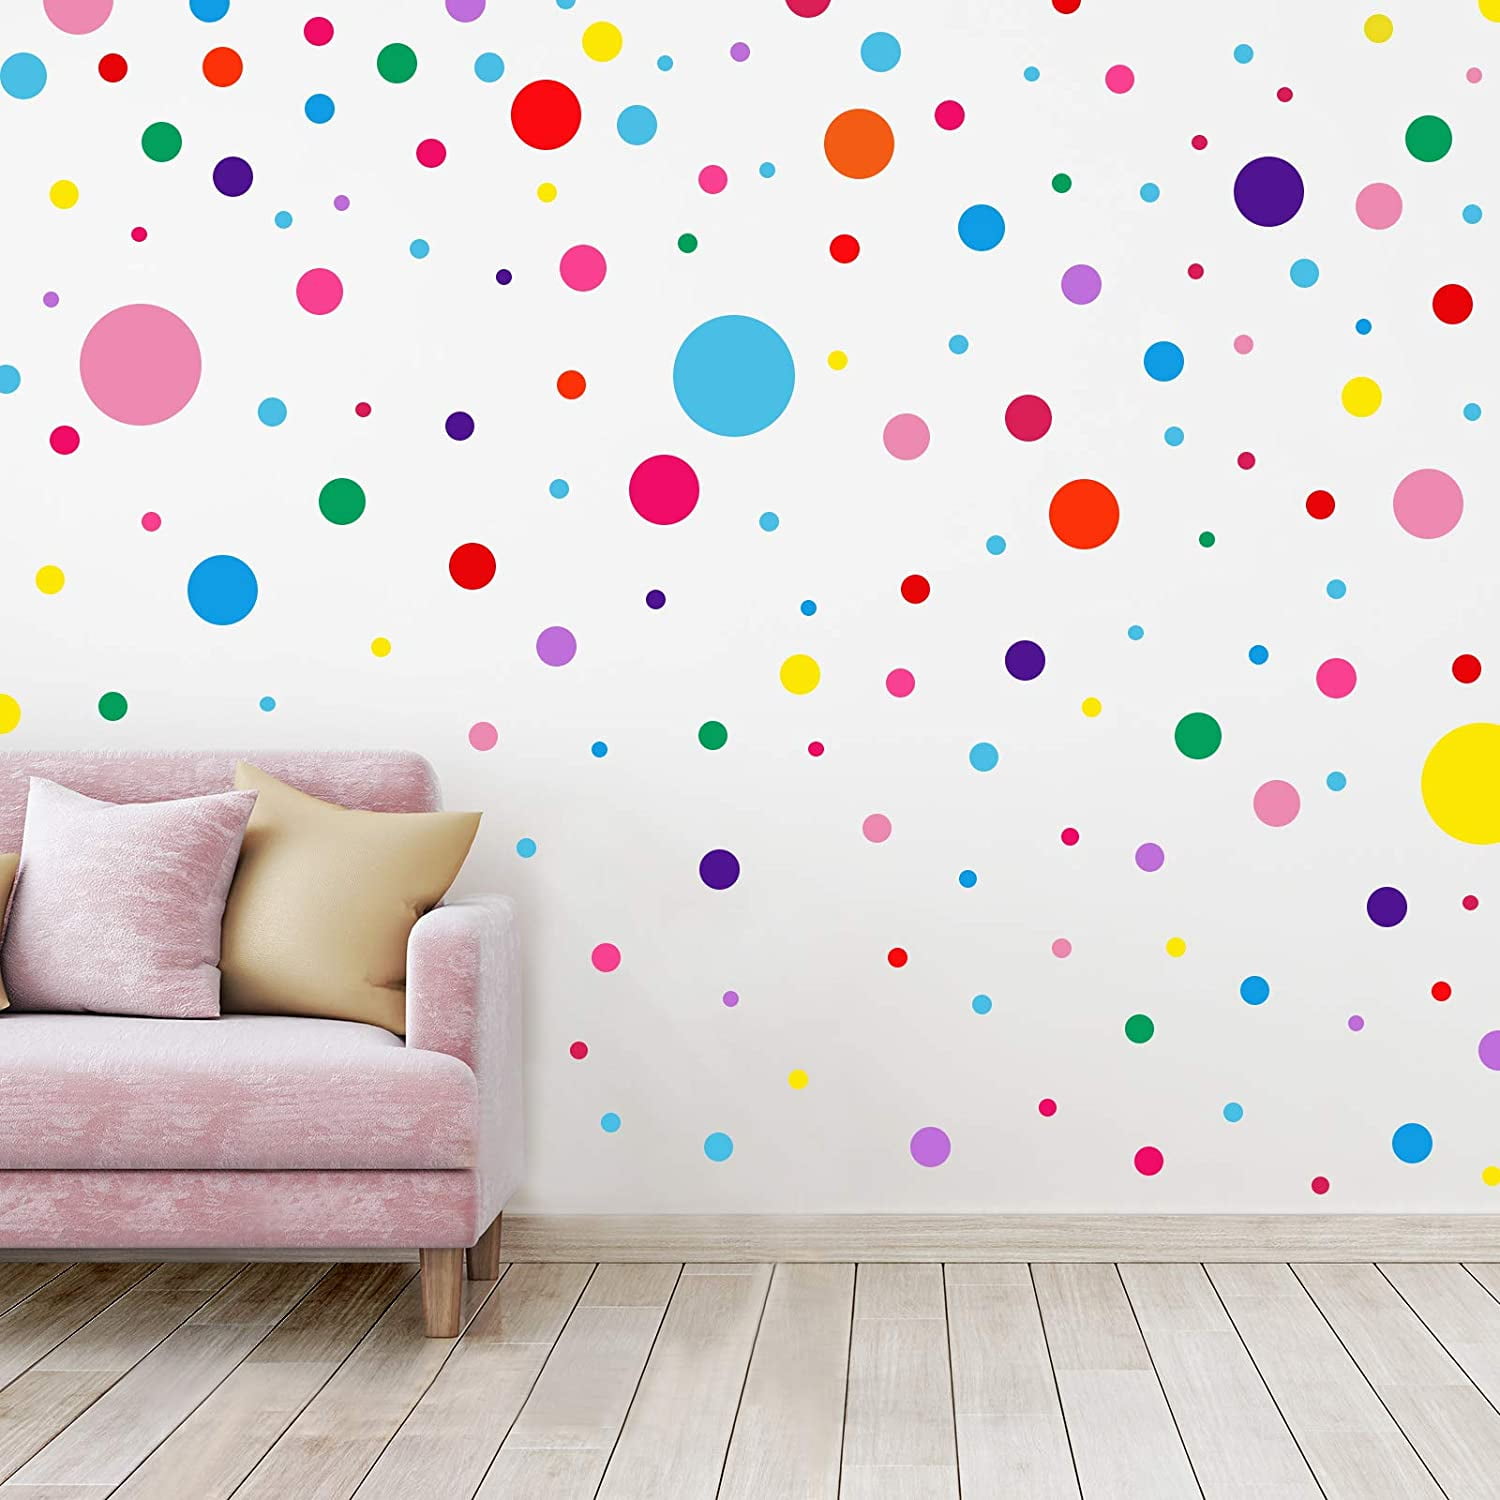 Removable Assorted Size Dots Decals Colorful Polka Dots Wall Sticker Multi Color Circles Dots Wall Décor Watercolor DIY Round Dot Art Mural for Baby Nursery Kids Boy Girl Bedroom Playroom 